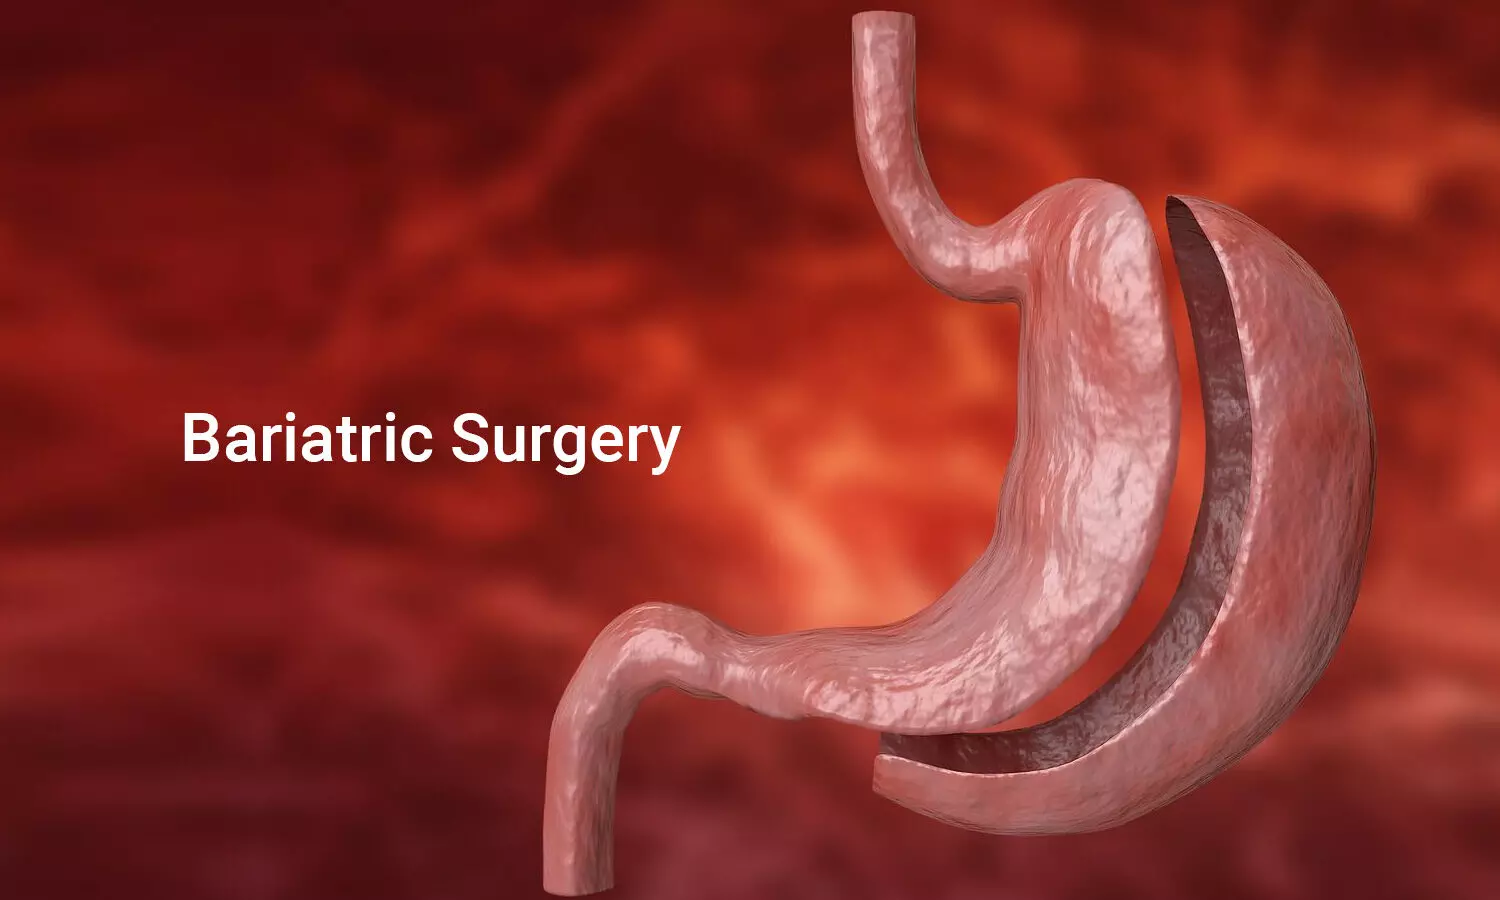 Bariatric surgery prevents cancer in patients with diabetes and obesity: Study